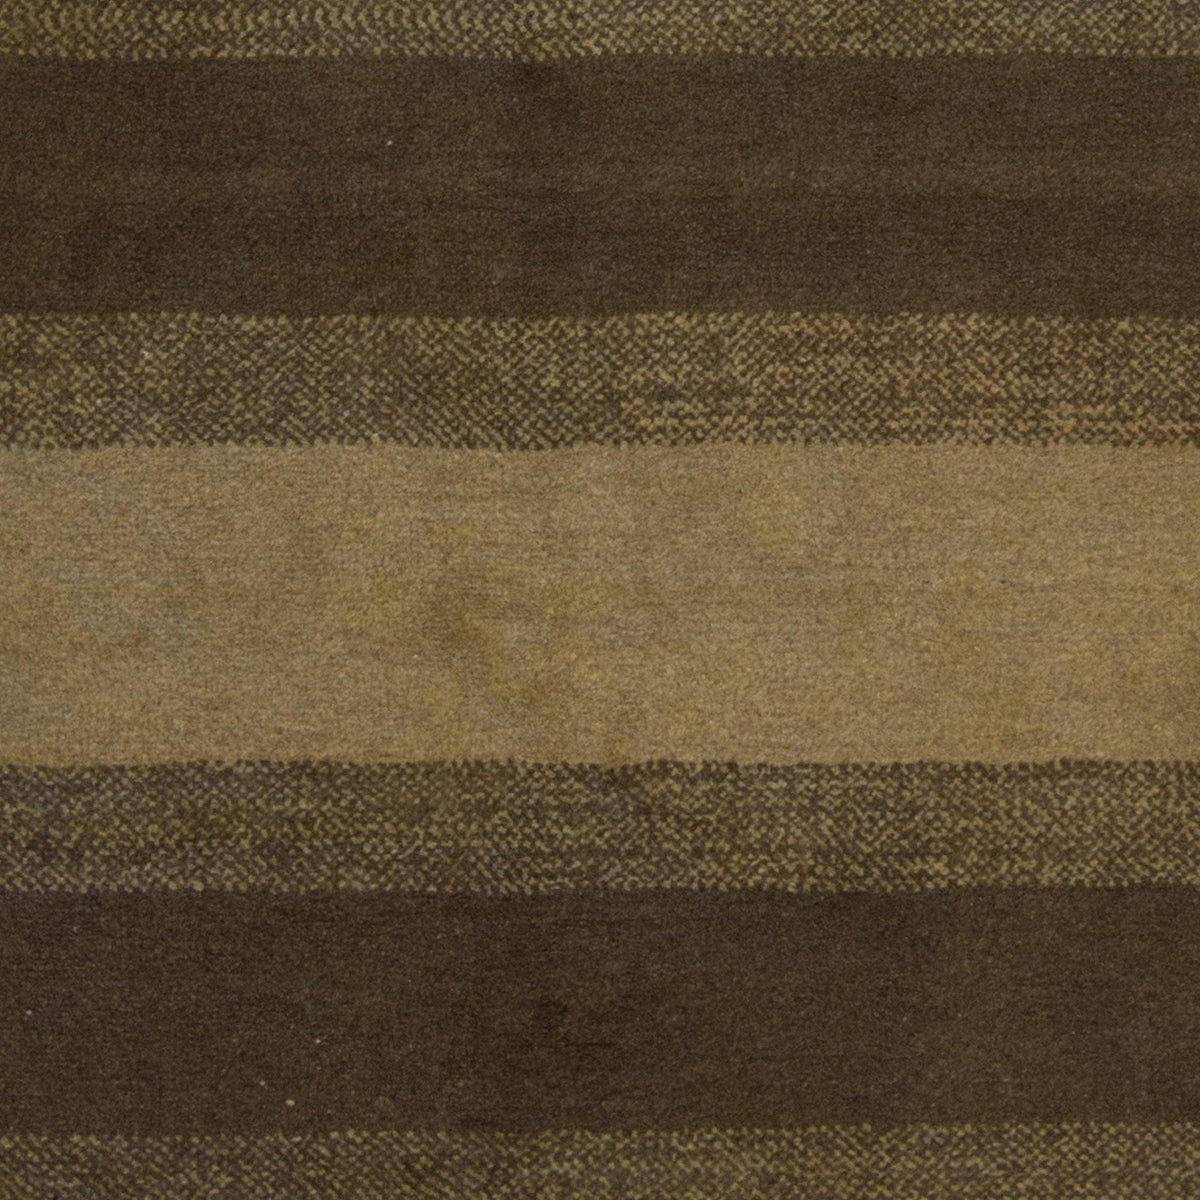 Hand-knotted 100% Wool Persian Gabbeh Rug 105cm x 142cm